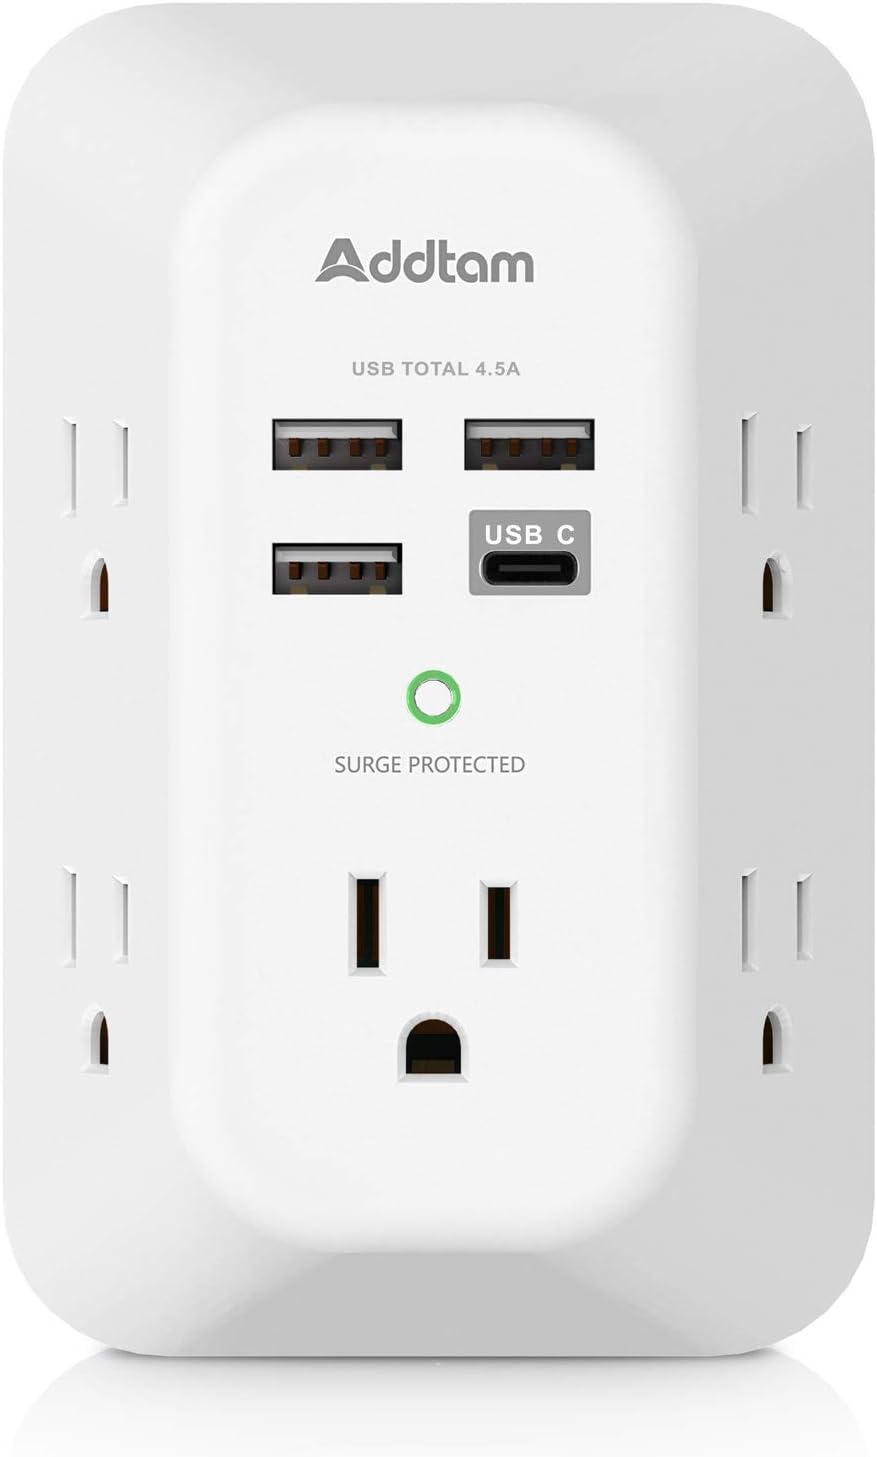 I recently picked up this Surge Protector Outlet Extender with a 5-Outlet Splitter, and it has become an essential component of my home office setup. Gone are the days of choosing which gadgets to charge and when; this power hub handles all my devices simultaneously with absolute ease.First off, the surge protector function gives me peace of mind, knowing my electronics are safeguarded against unexpected power spikes. I appreciate the design, which doesn't block other outlets and even leaves eno